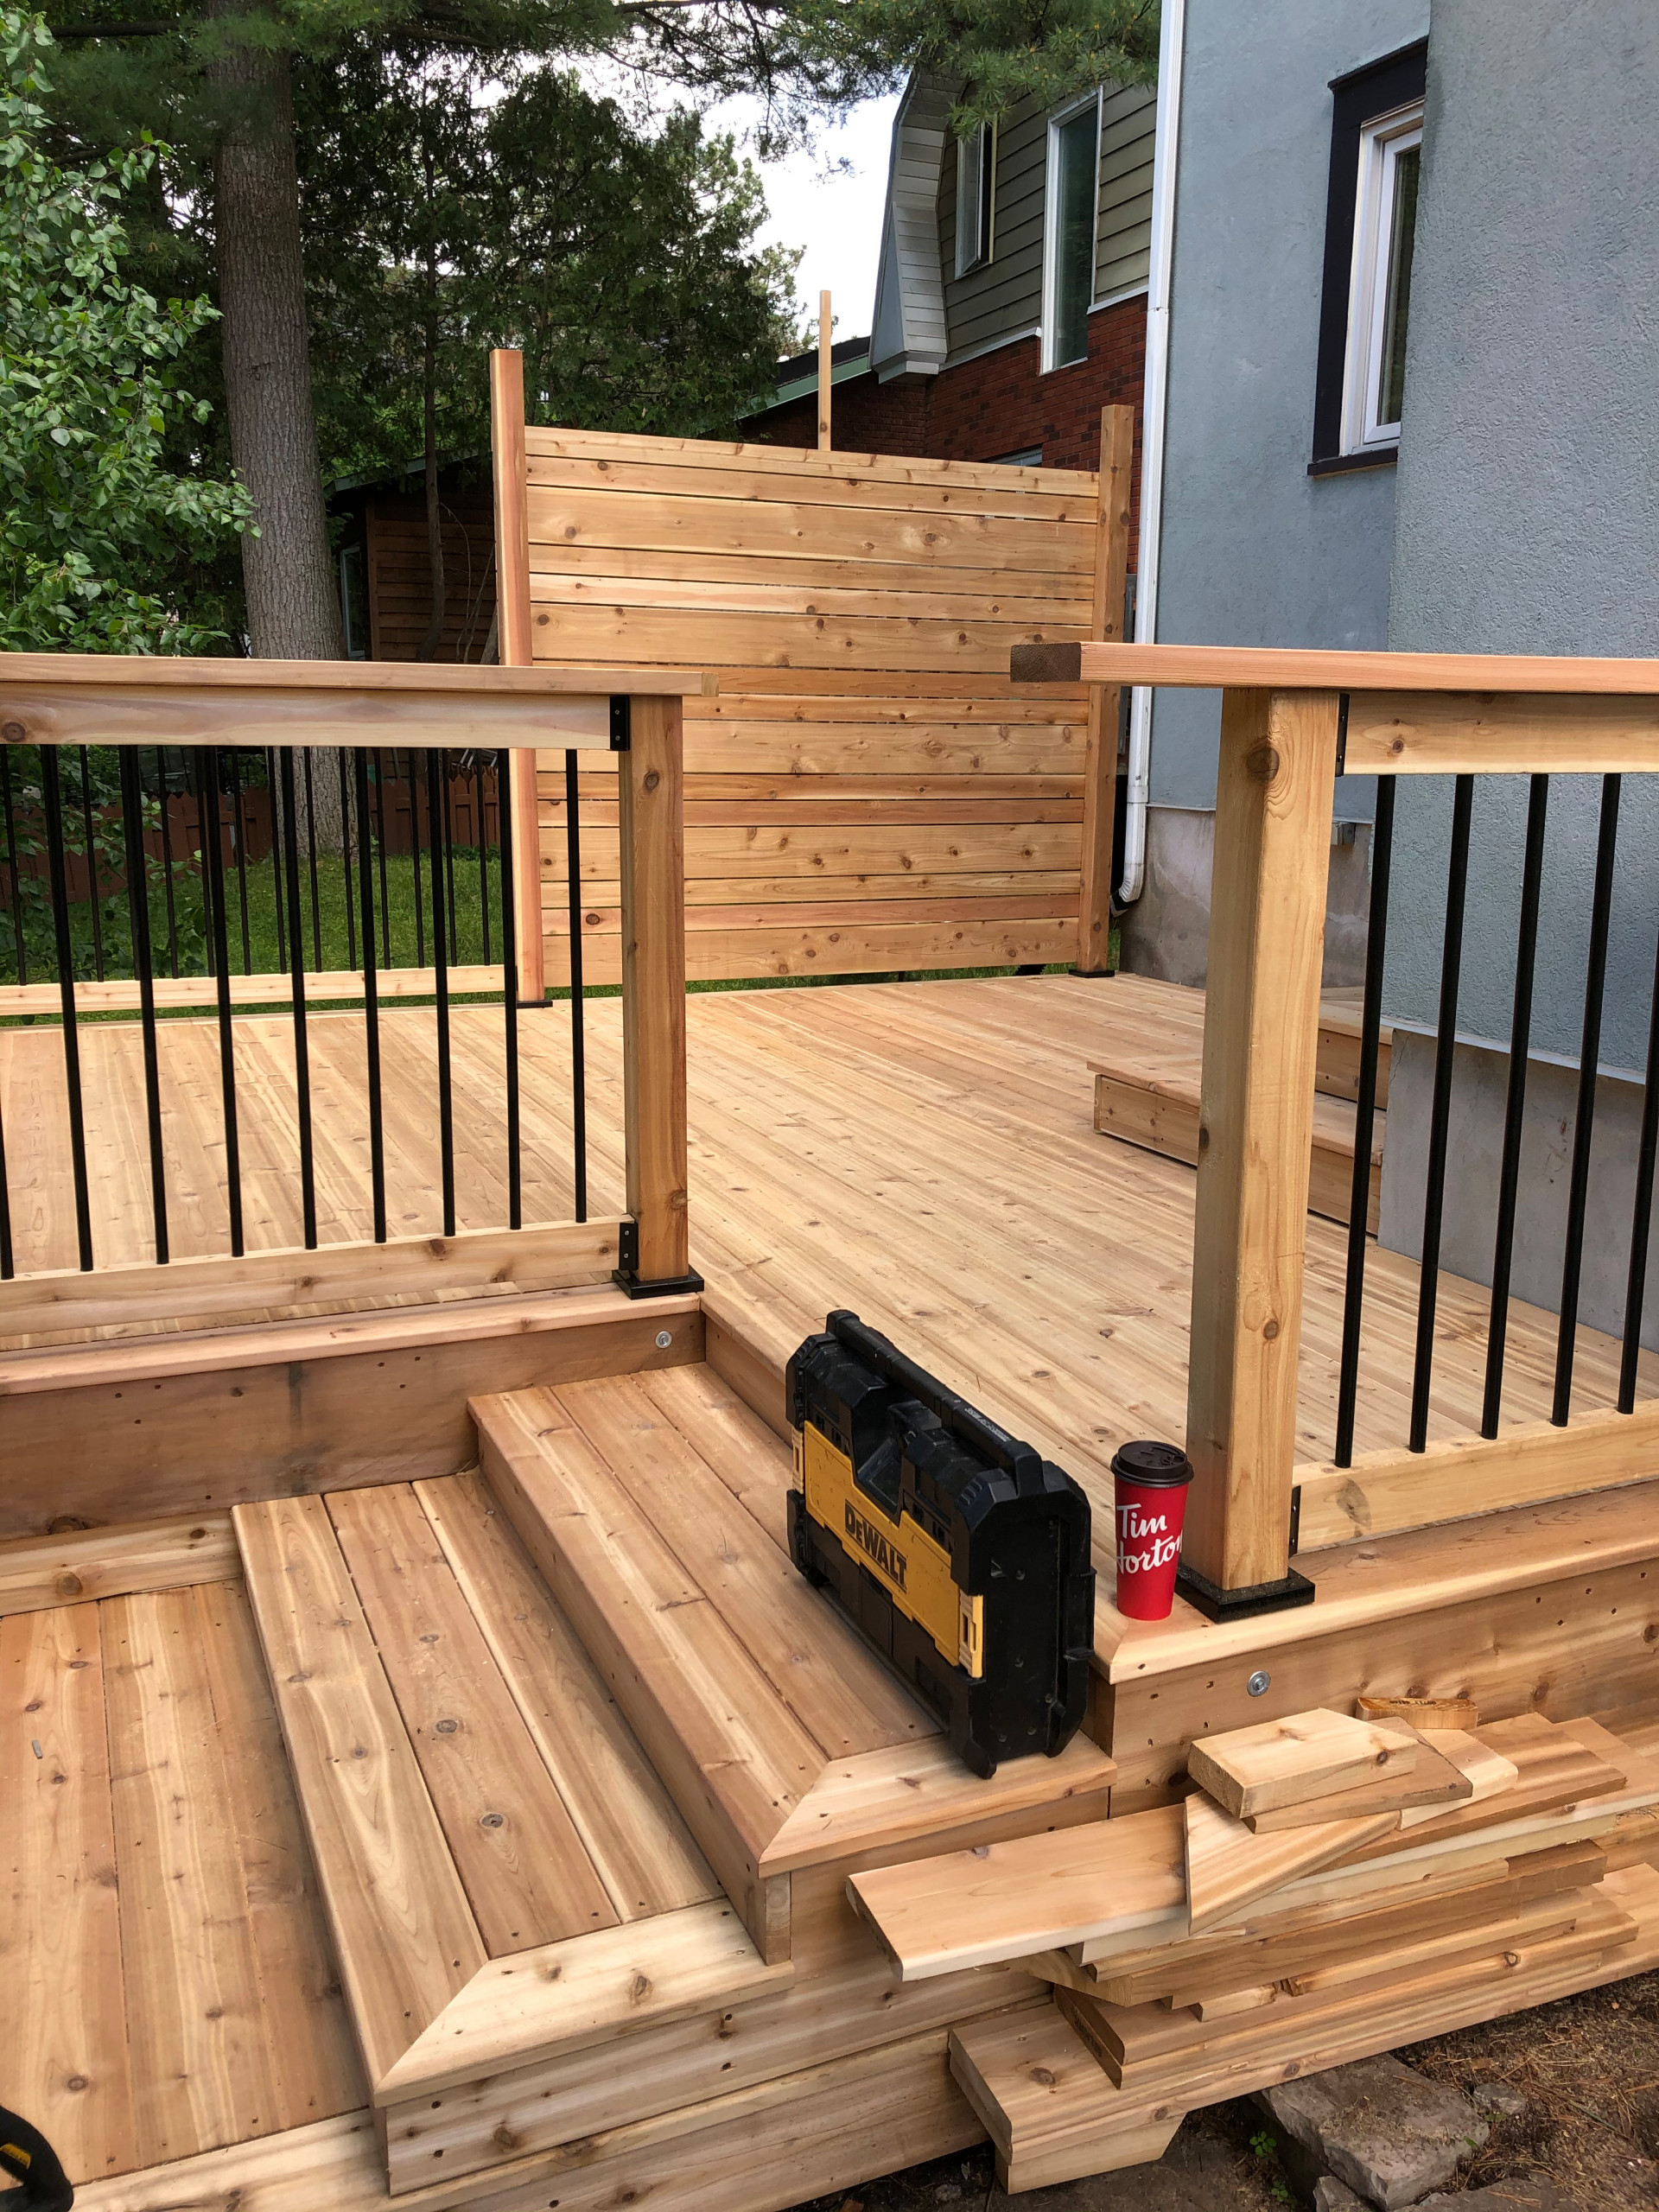 Red cedar deck with black round balusters